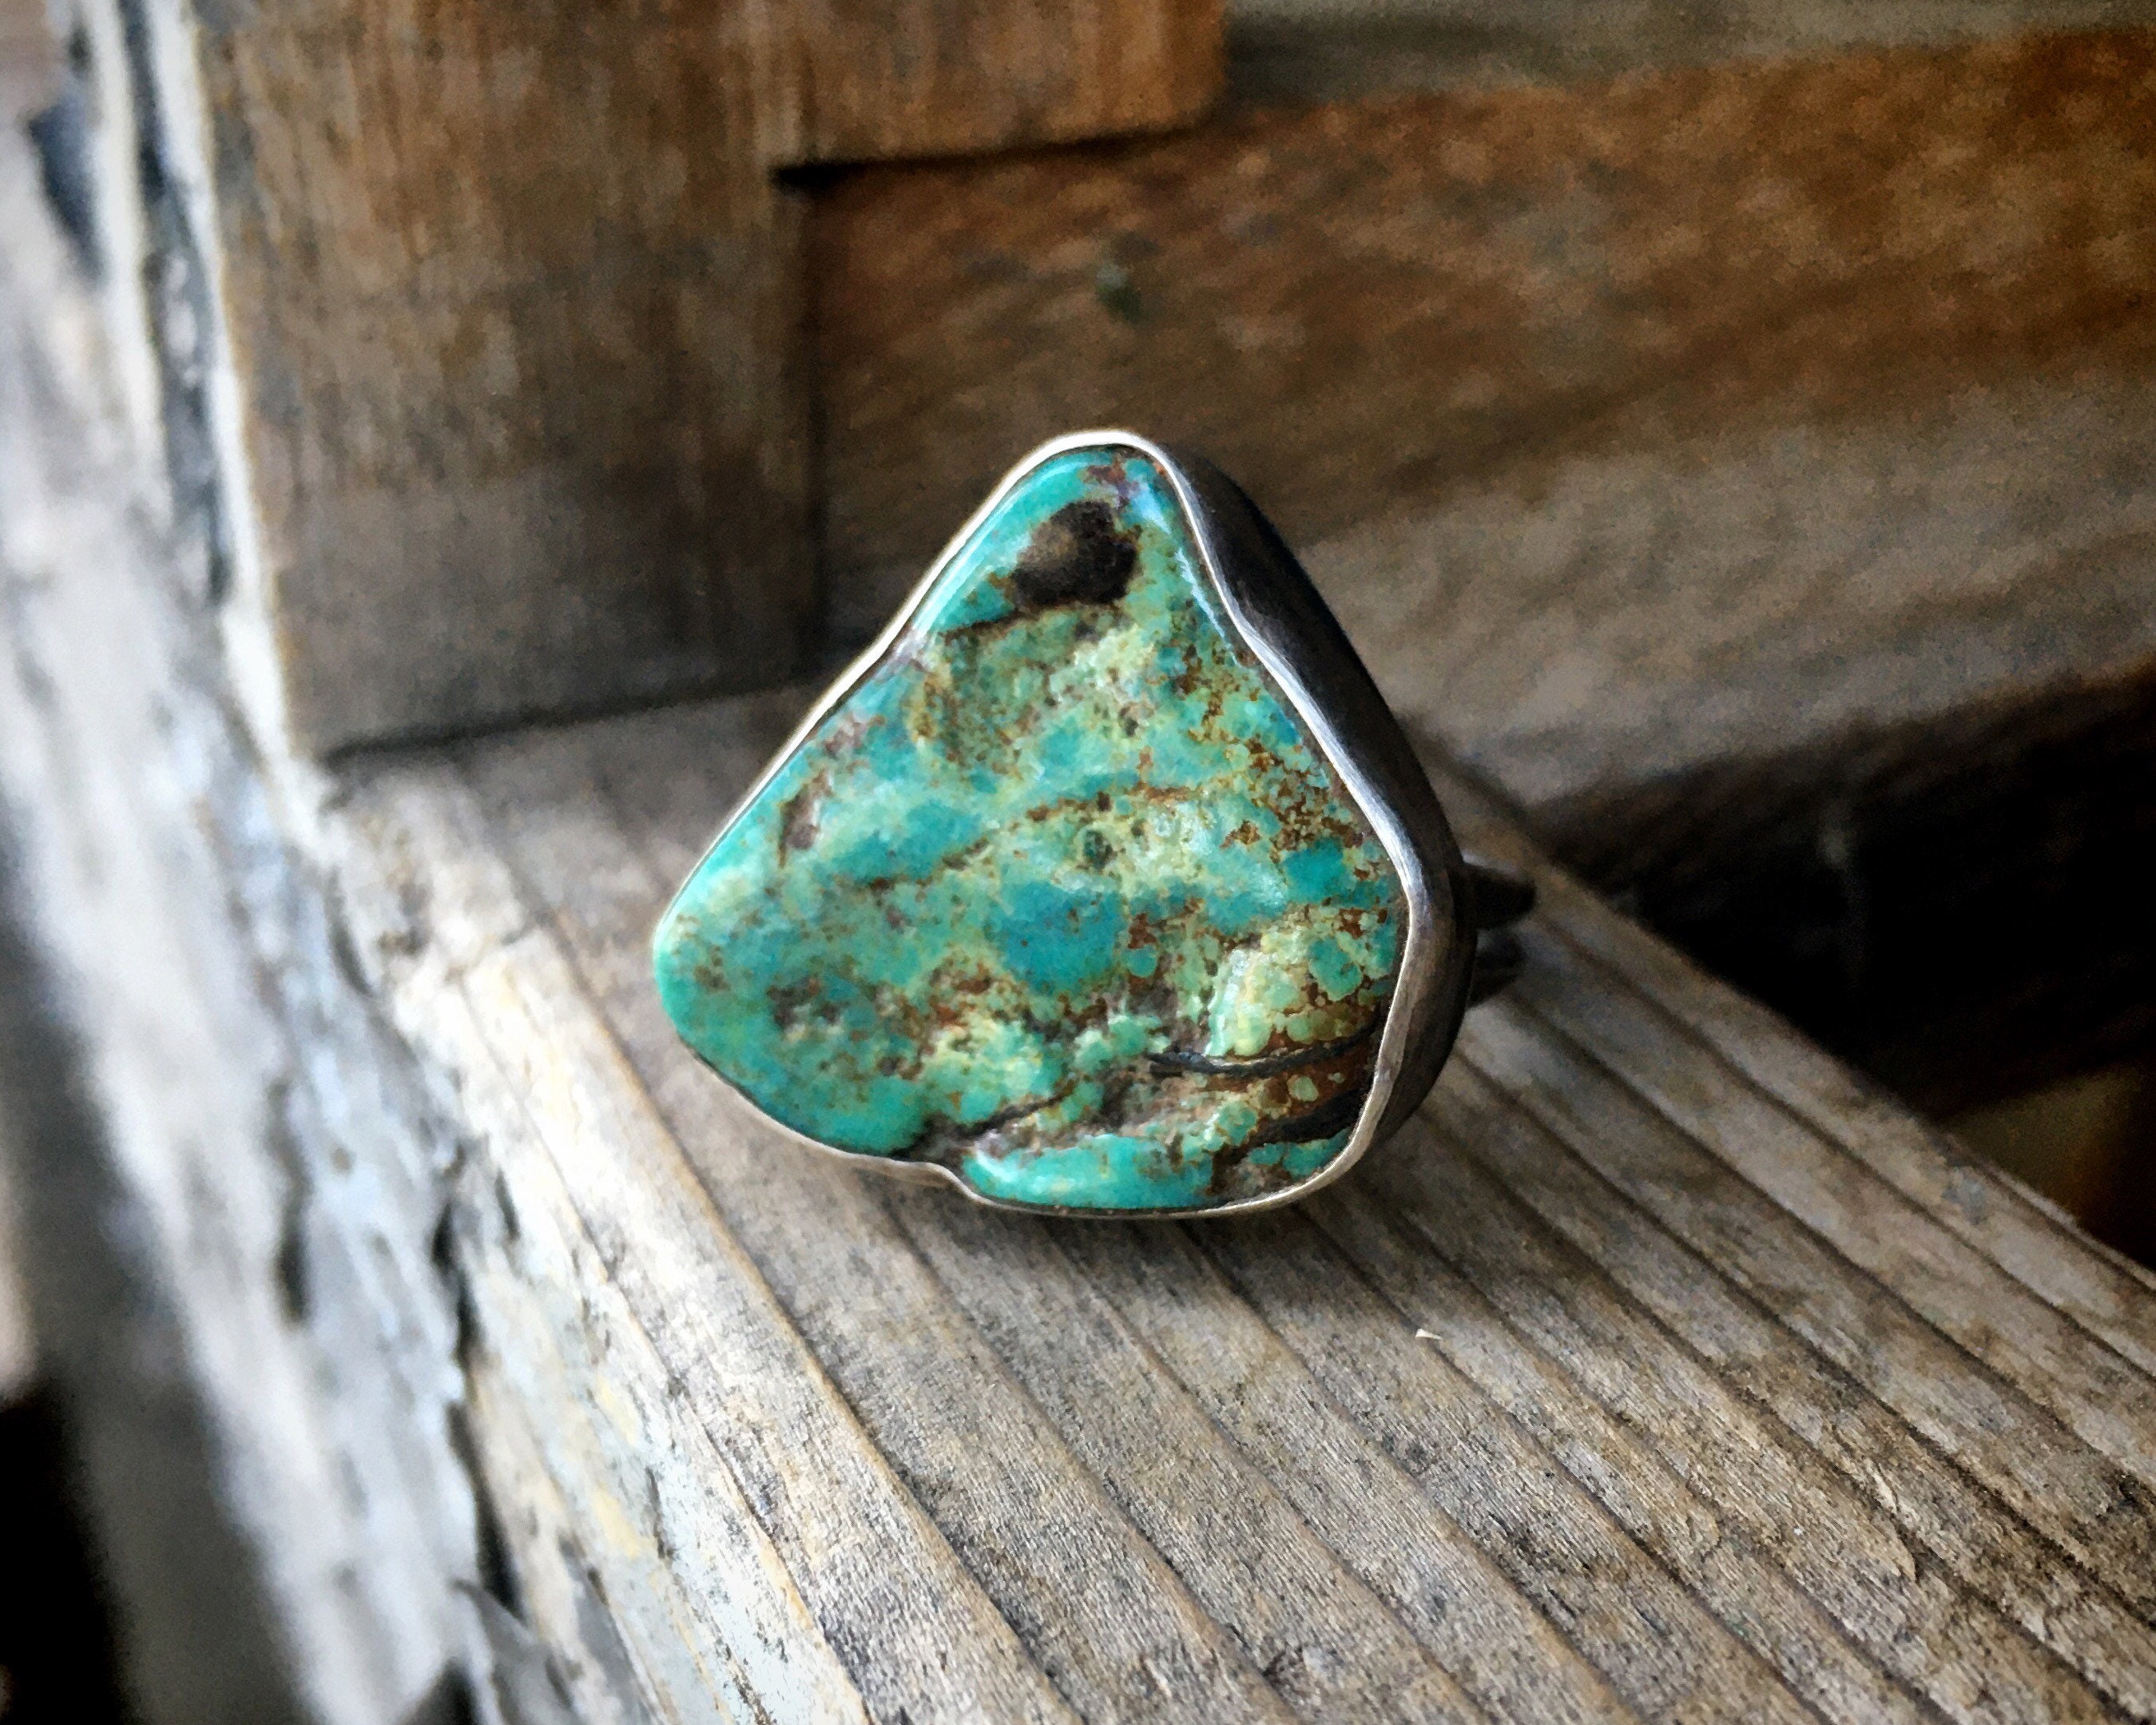 Natural Turquoise Stone Ring For Men 925 Sterling Silver Vintage Statement  Oval Blue Mens Turkish Handmade Jewelry 231220 From Huafei10, $31.27 |  DHgate.Com